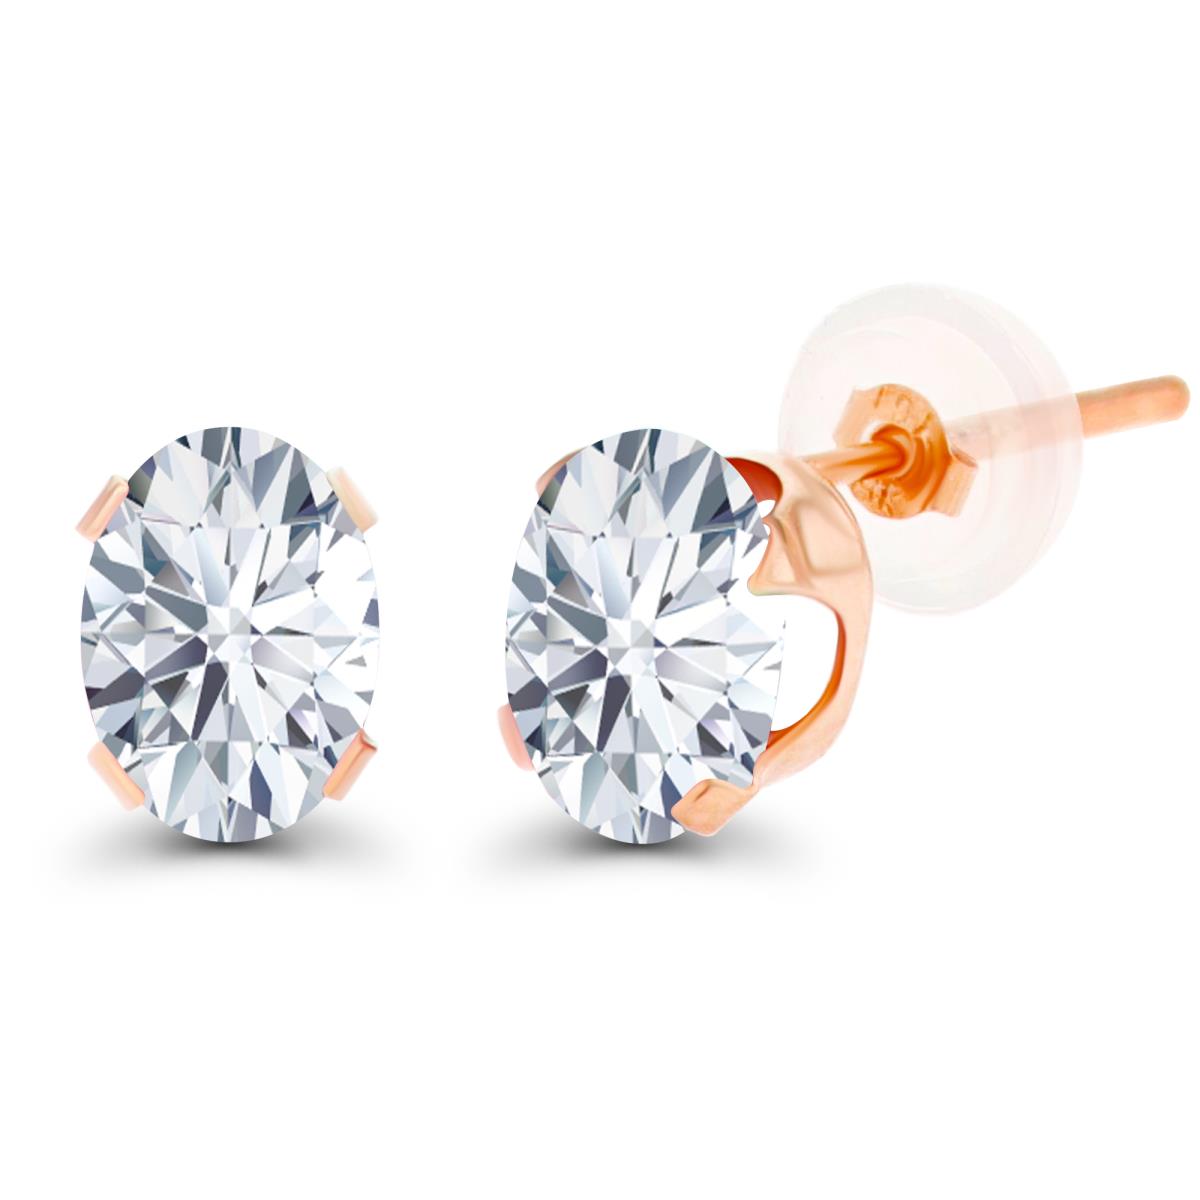 10K Rose Gold 7x5mm Oval White Topaz Stud Earring with Silicone Back